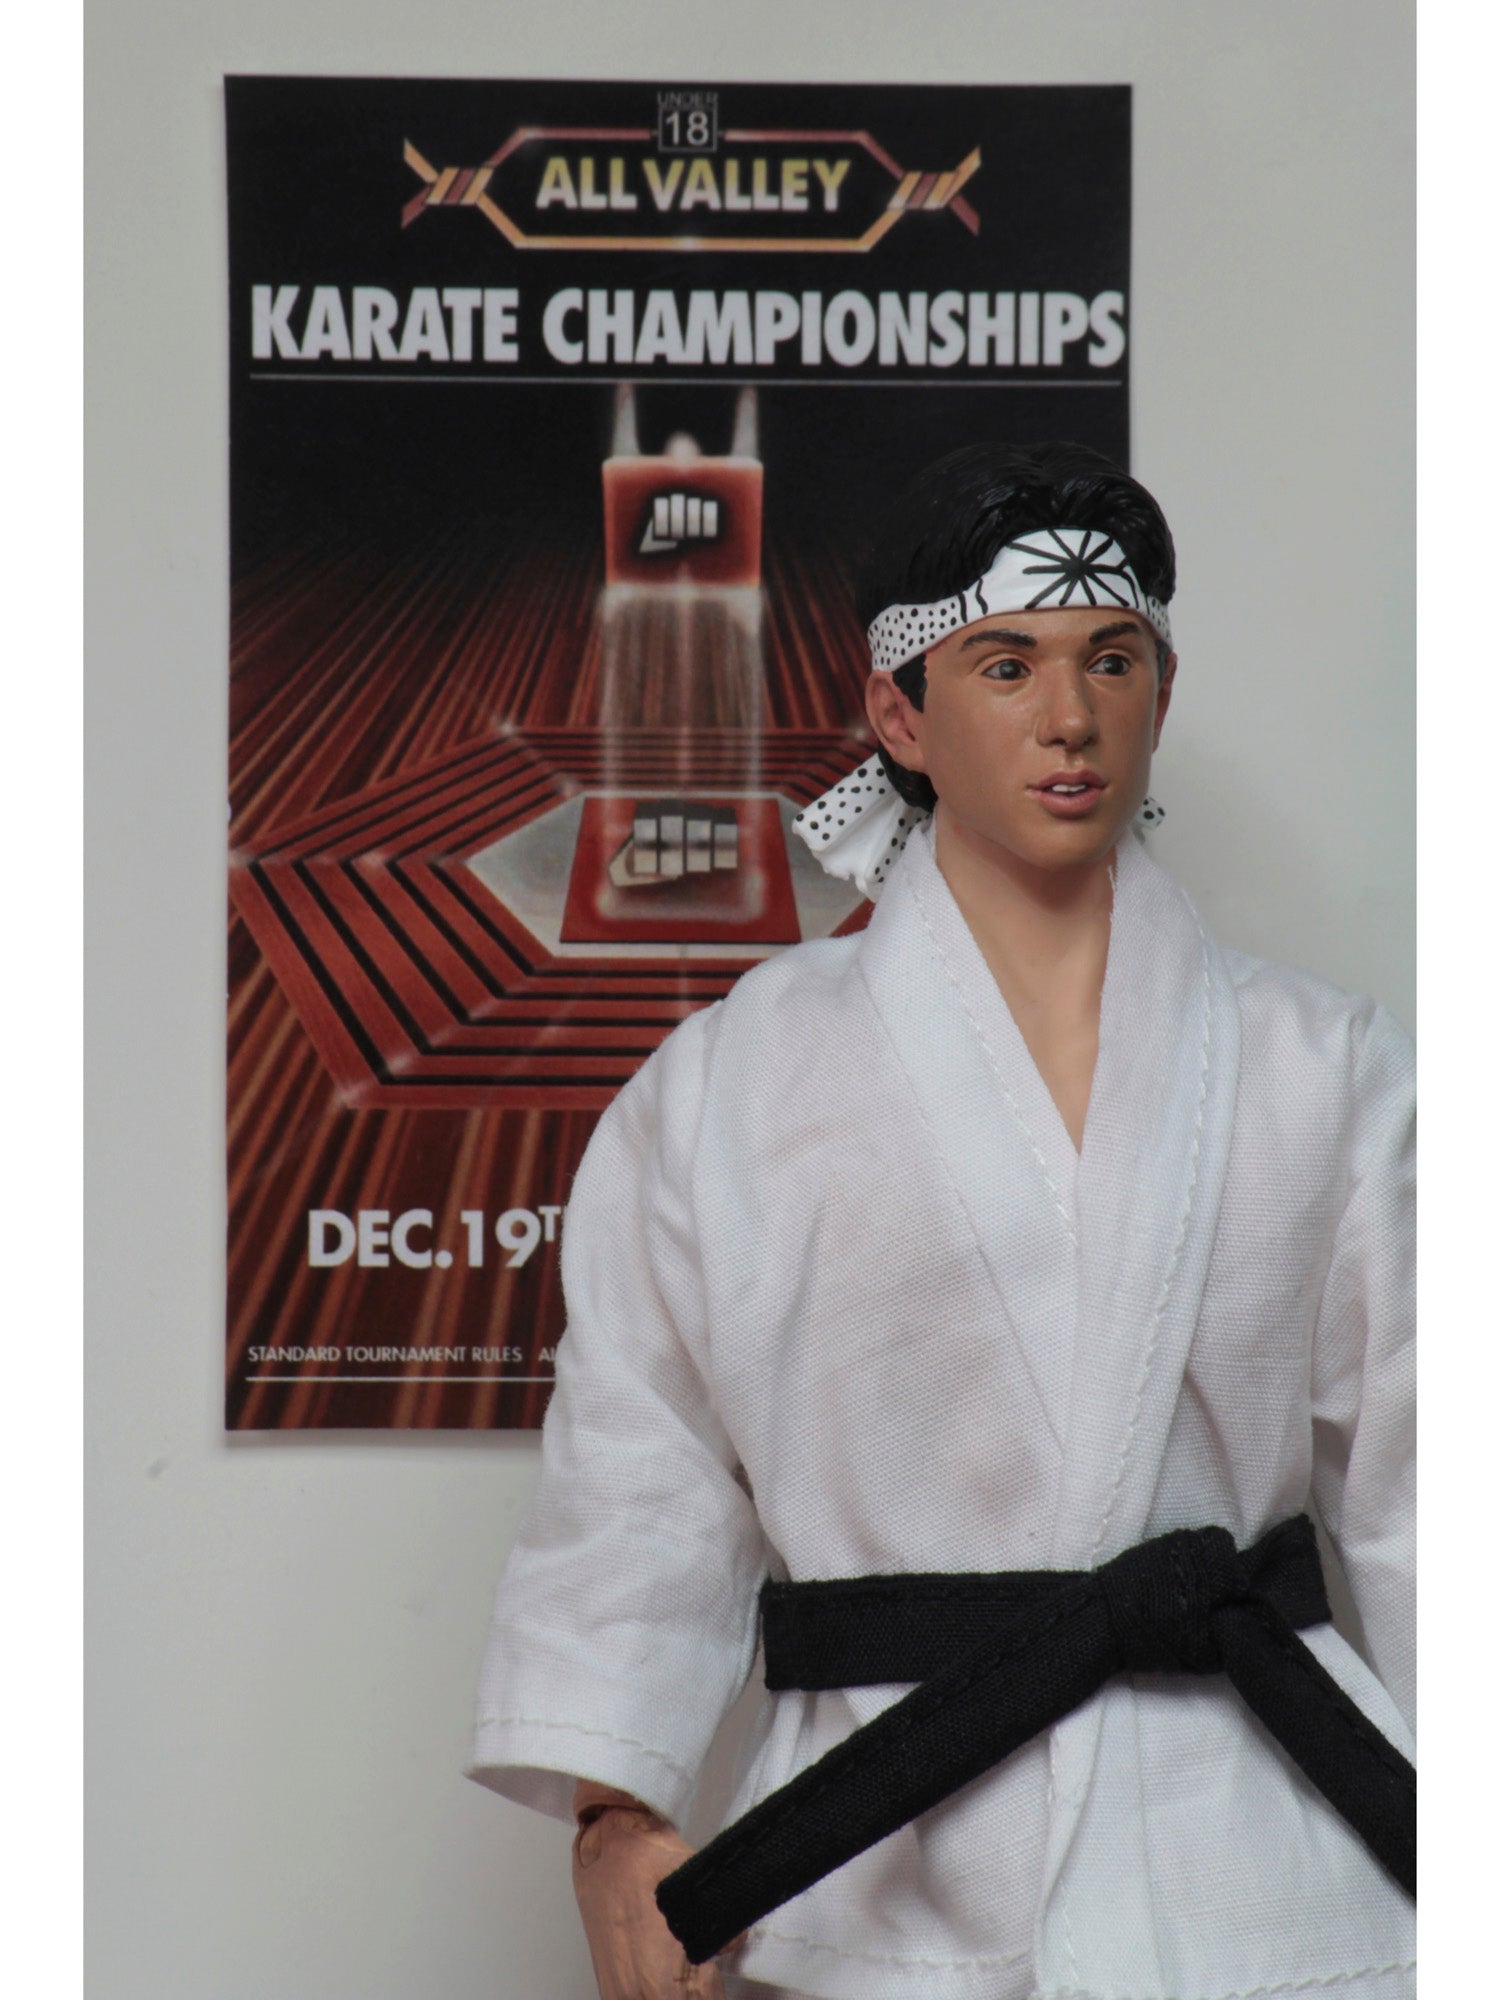 NECA - The Karate Kid - 8" Clothed Figures - Tournament 2 Pack - costumes.com